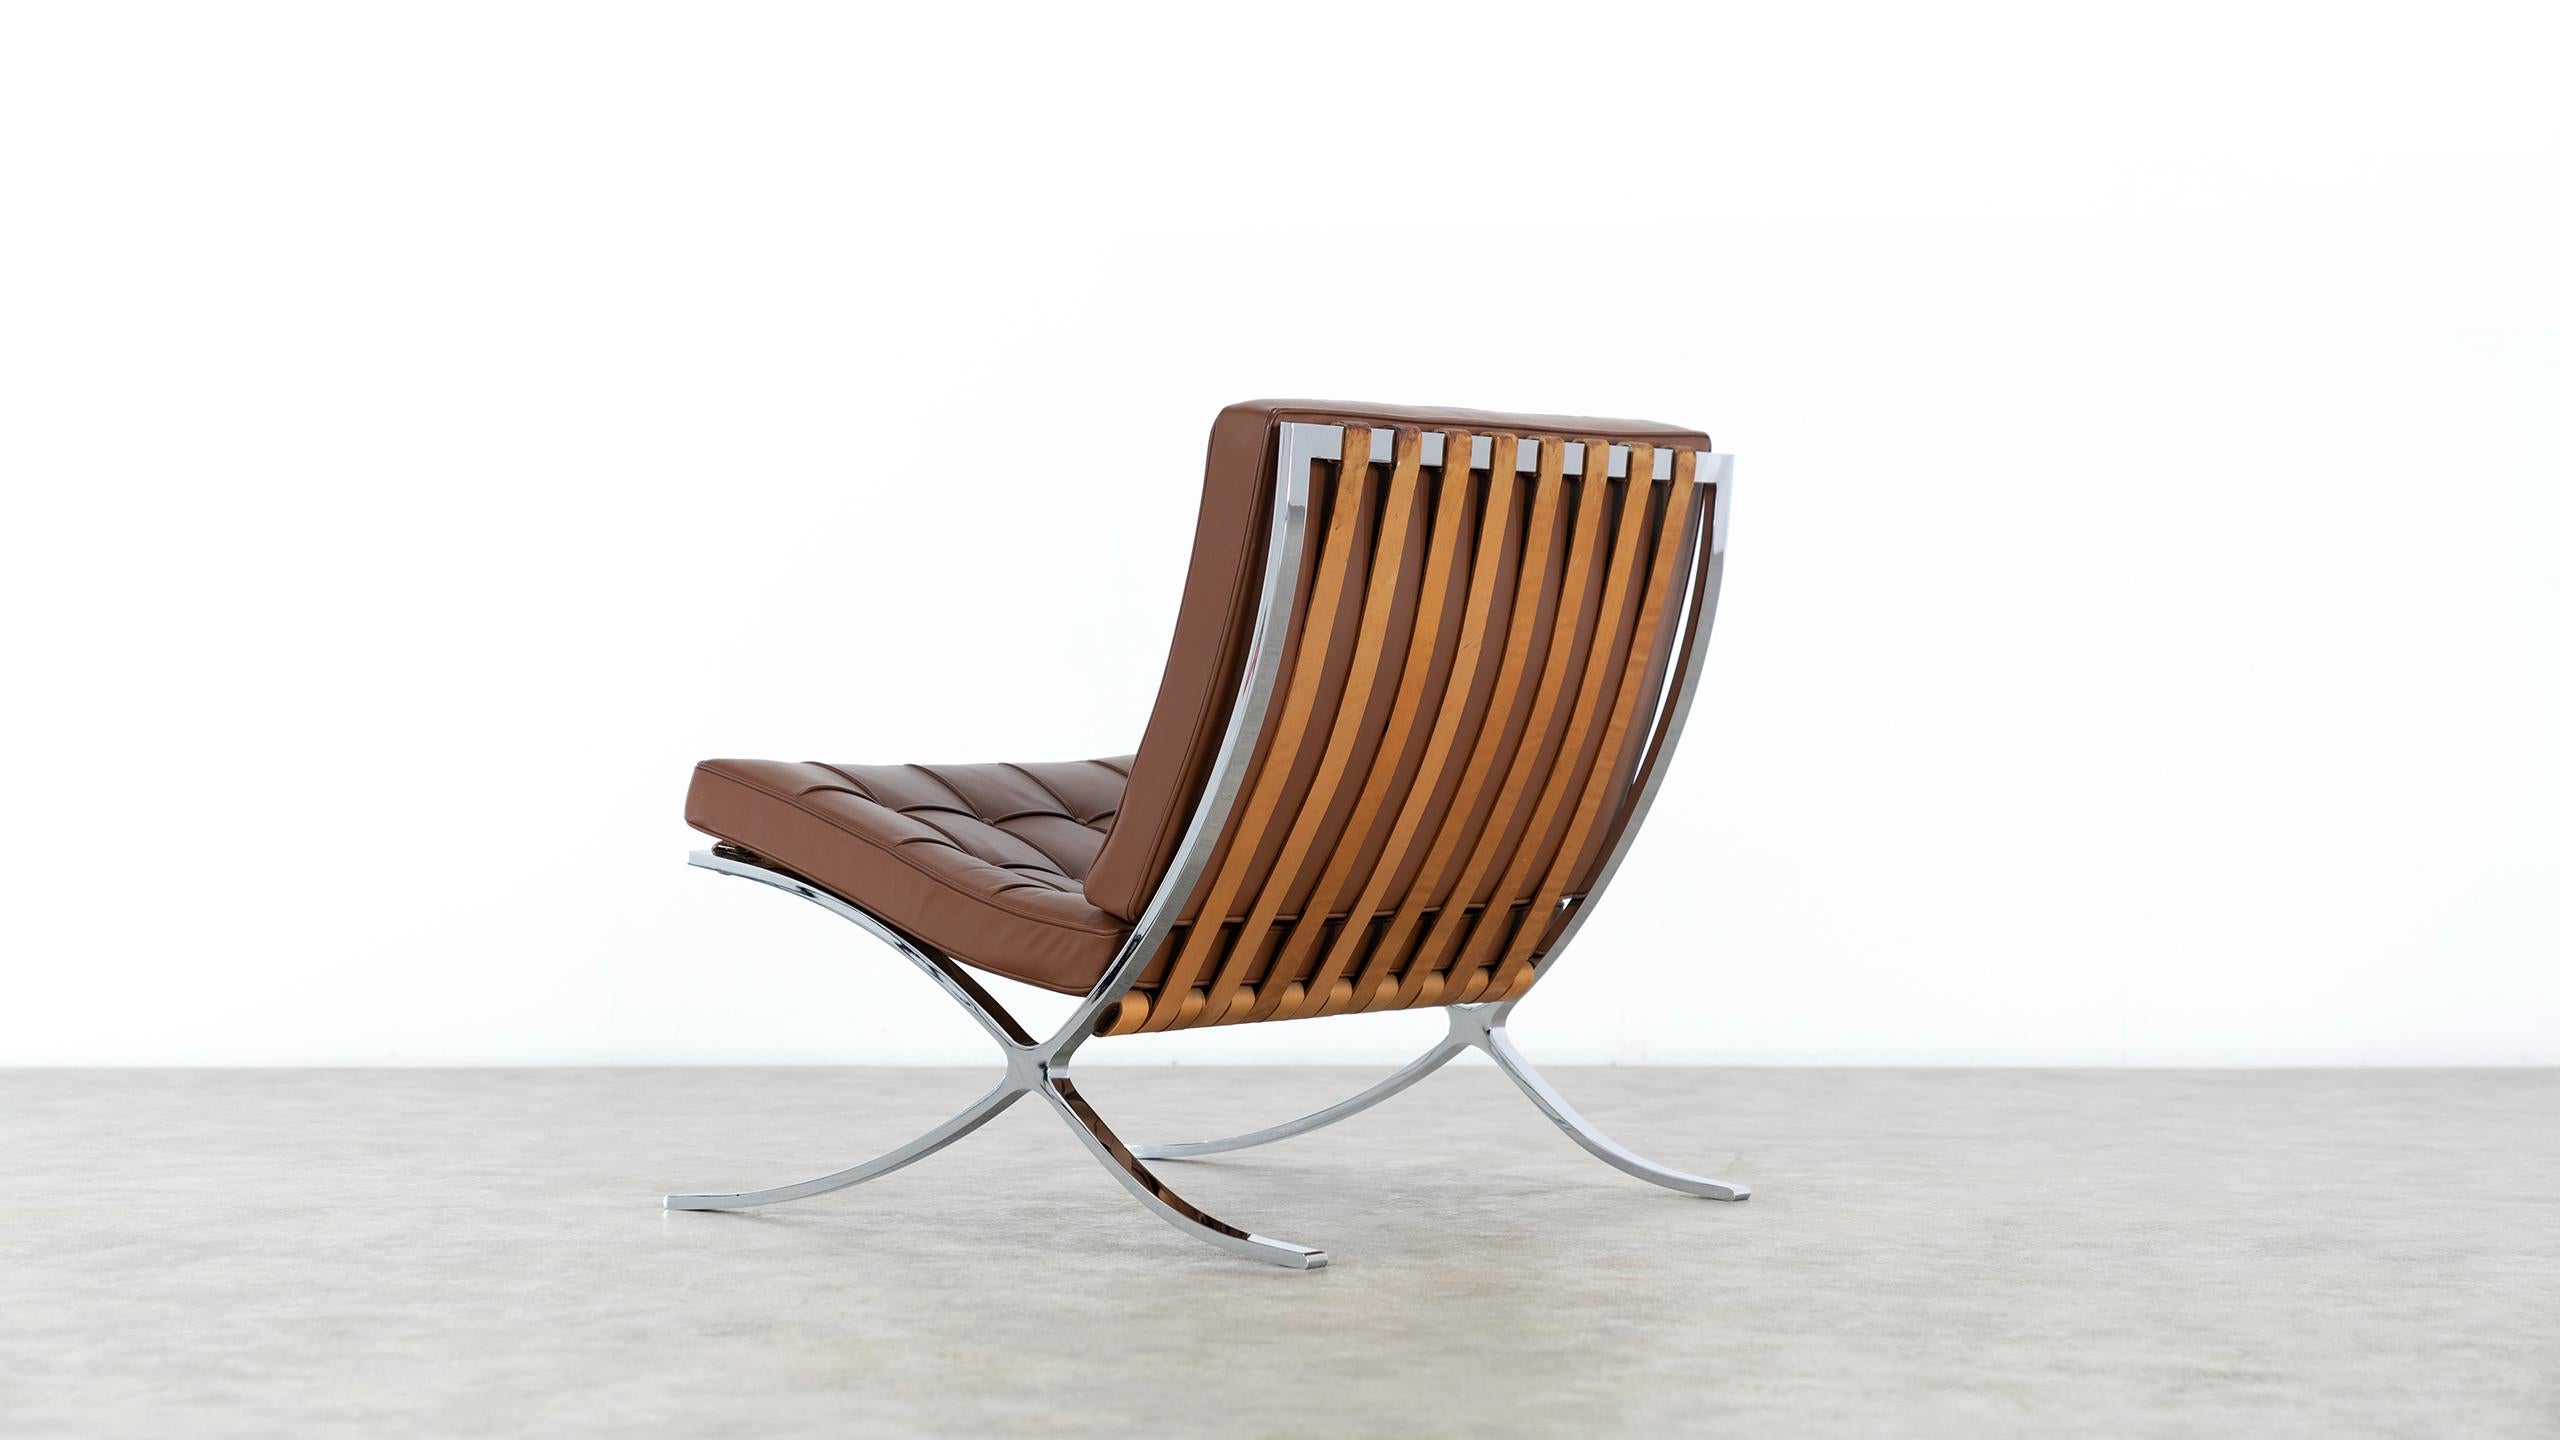 American Ludwig Mies van der Rohe, Barcelona Chair, 1962 by Knoll International Leather